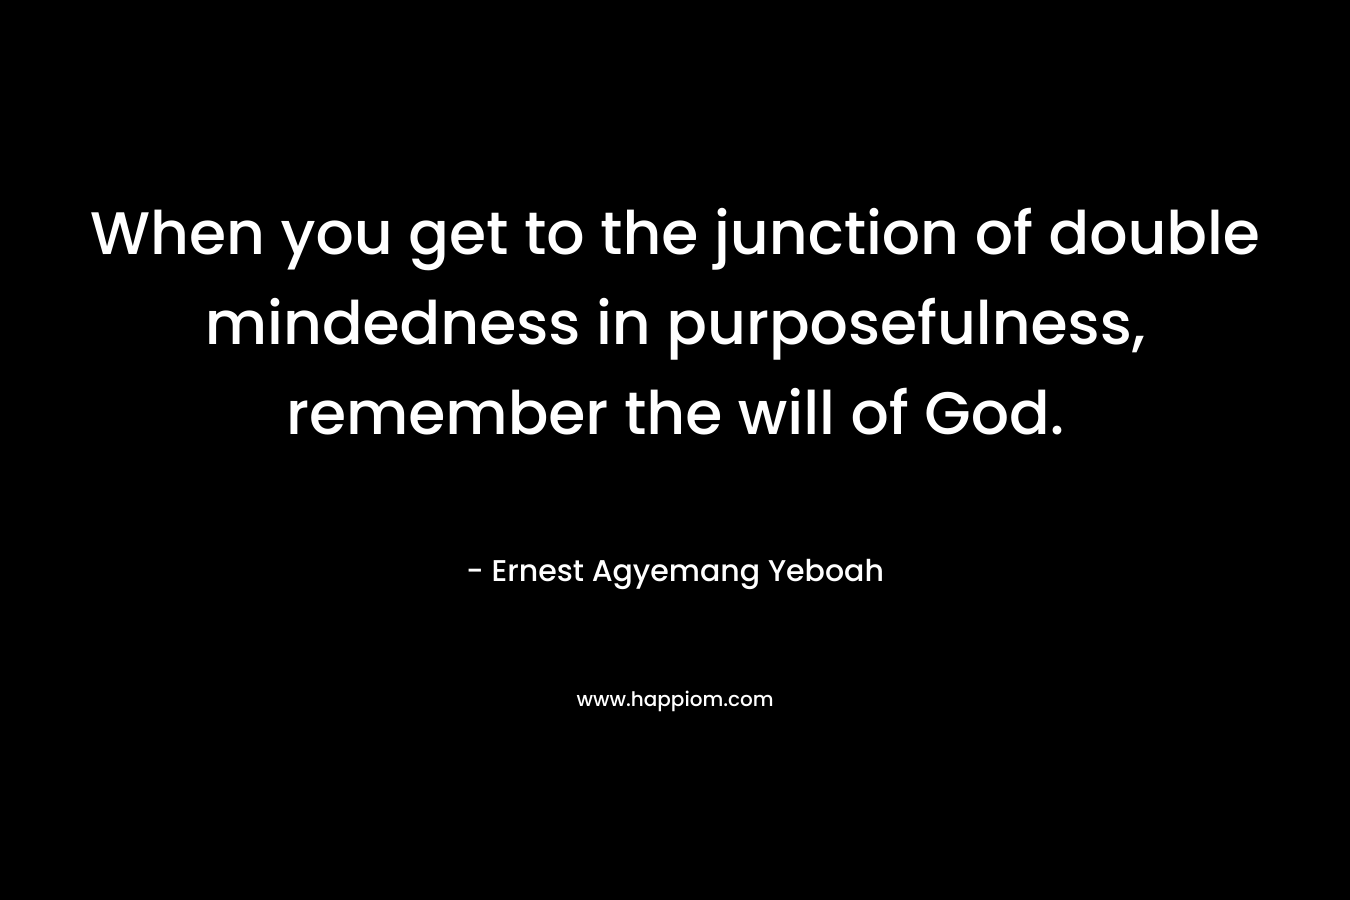 When you get to the junction of double mindedness in purposefulness, remember the will of God. – Ernest Agyemang Yeboah